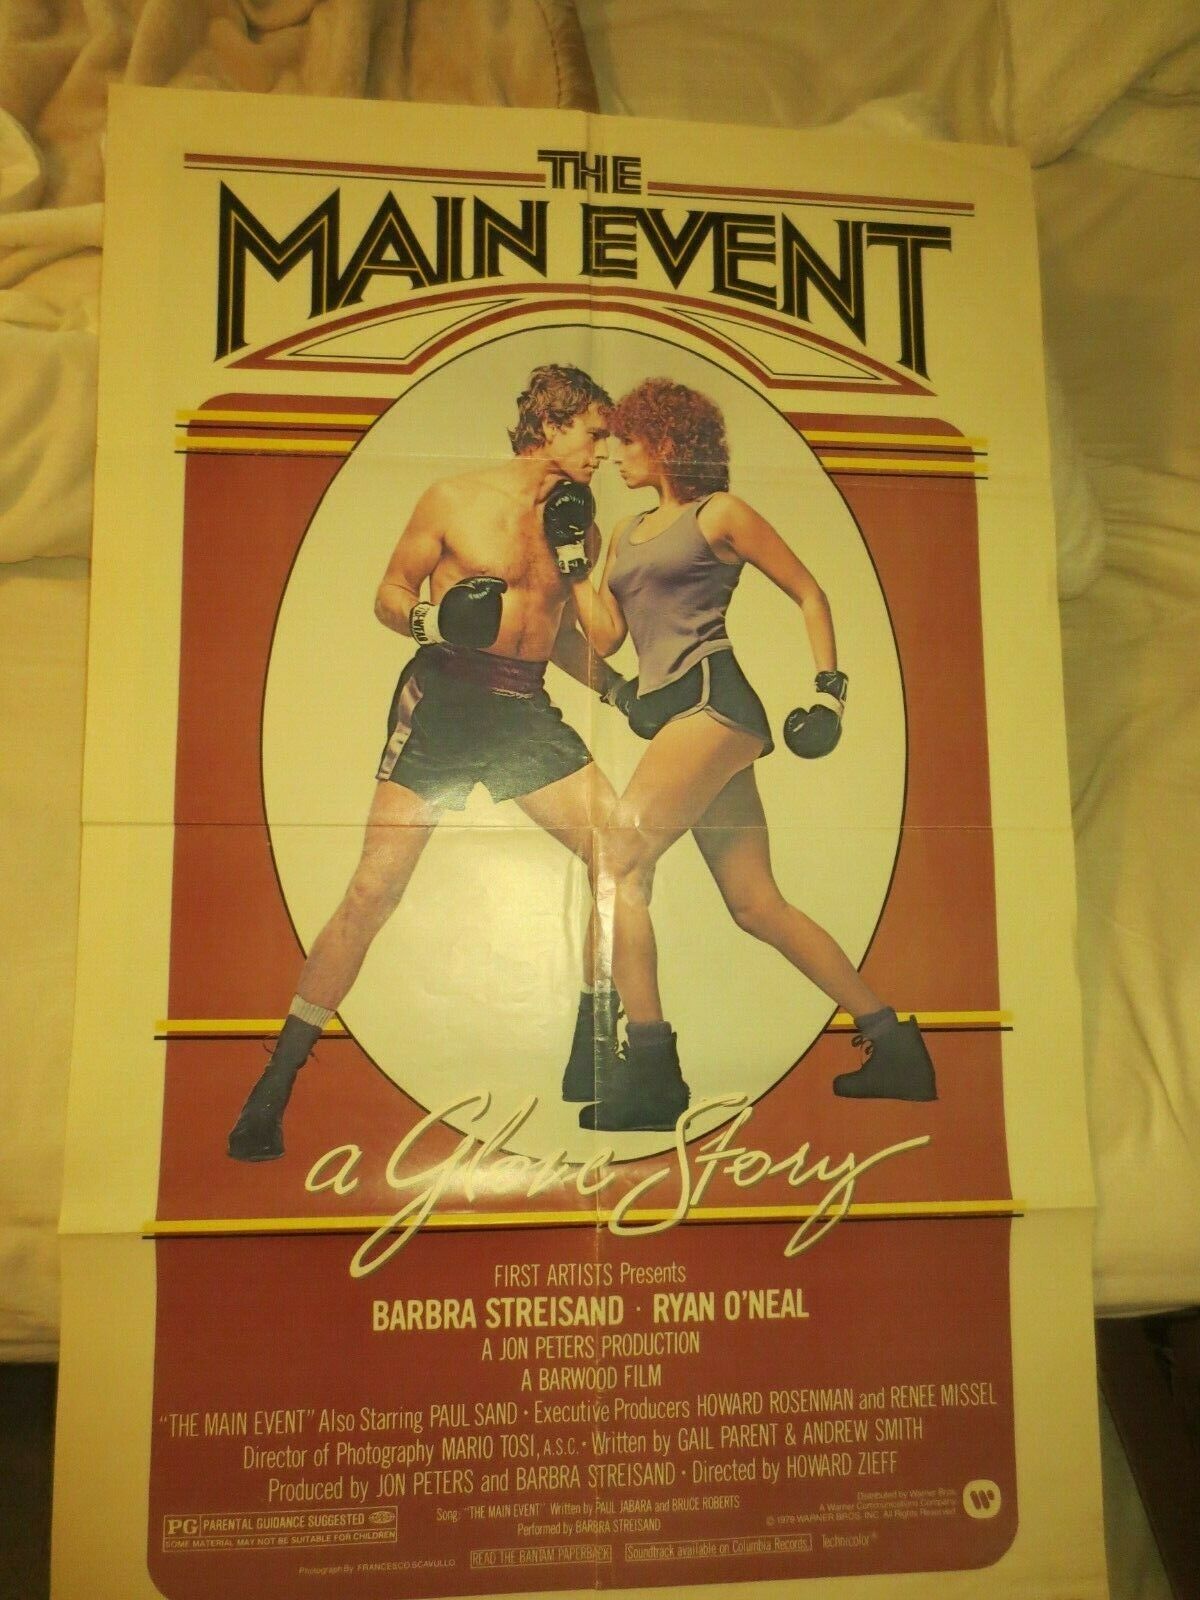 ORIGINAL 1979 "THE MAIN EVENT" BOXING MOVIE POSTER- LARGE 26" X 40"-NICE COND.